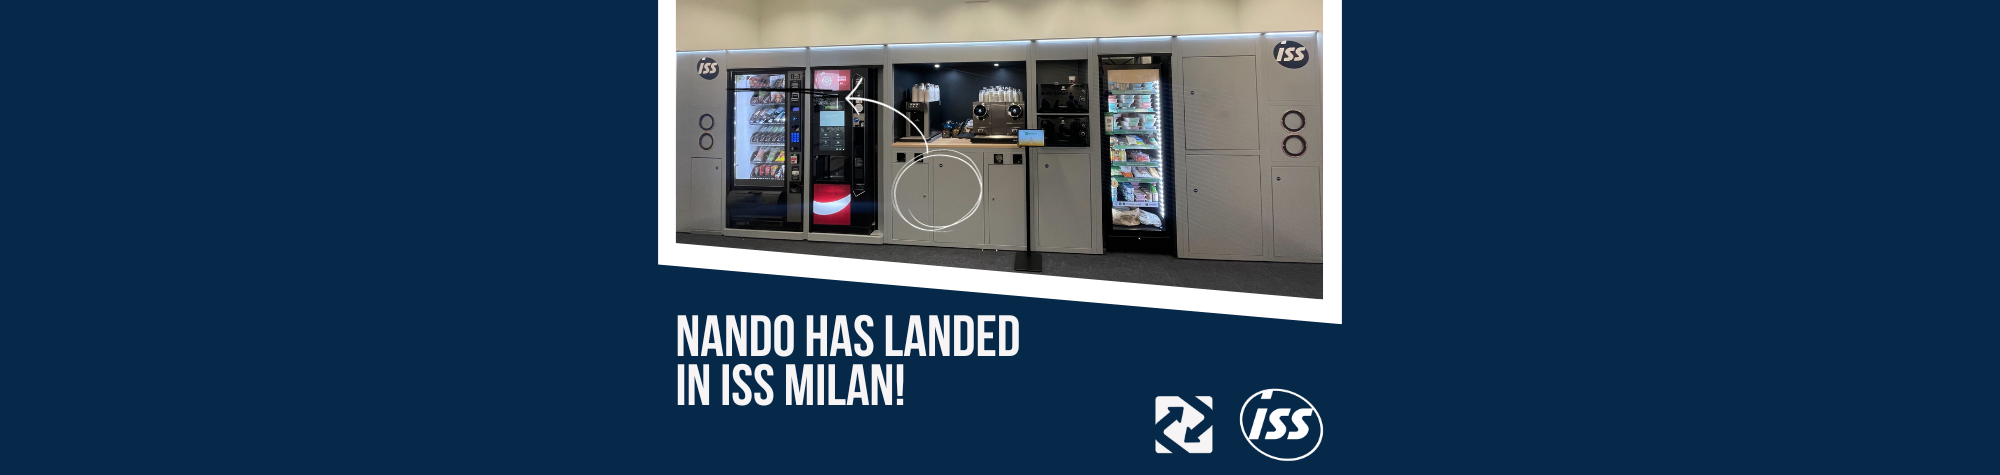 NANDO has landed in ISS Milan!